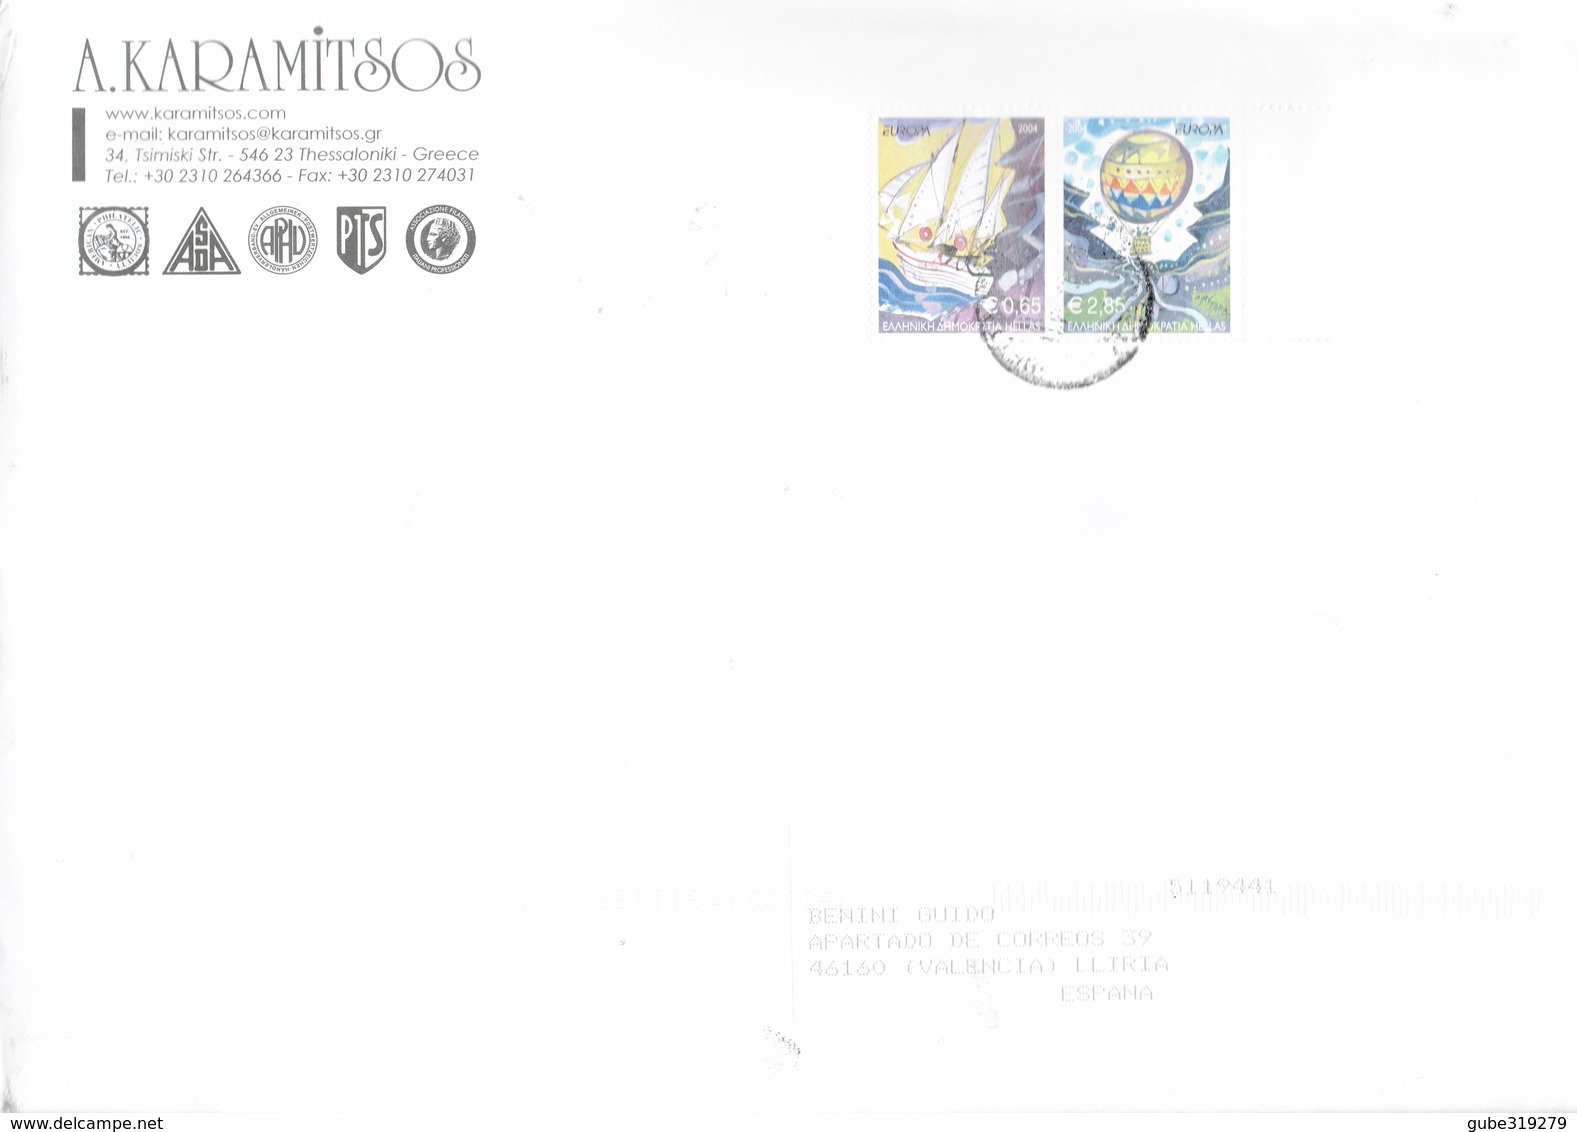 GREECE 2019 -   ENVELOPE SENT TO SPAIN WITH STRIP OF EUROPA 2004: 2 ST  € 0,65-2,85 MAILING DATE 2019 UNREADEABLE RE GRE - Covers & Documents